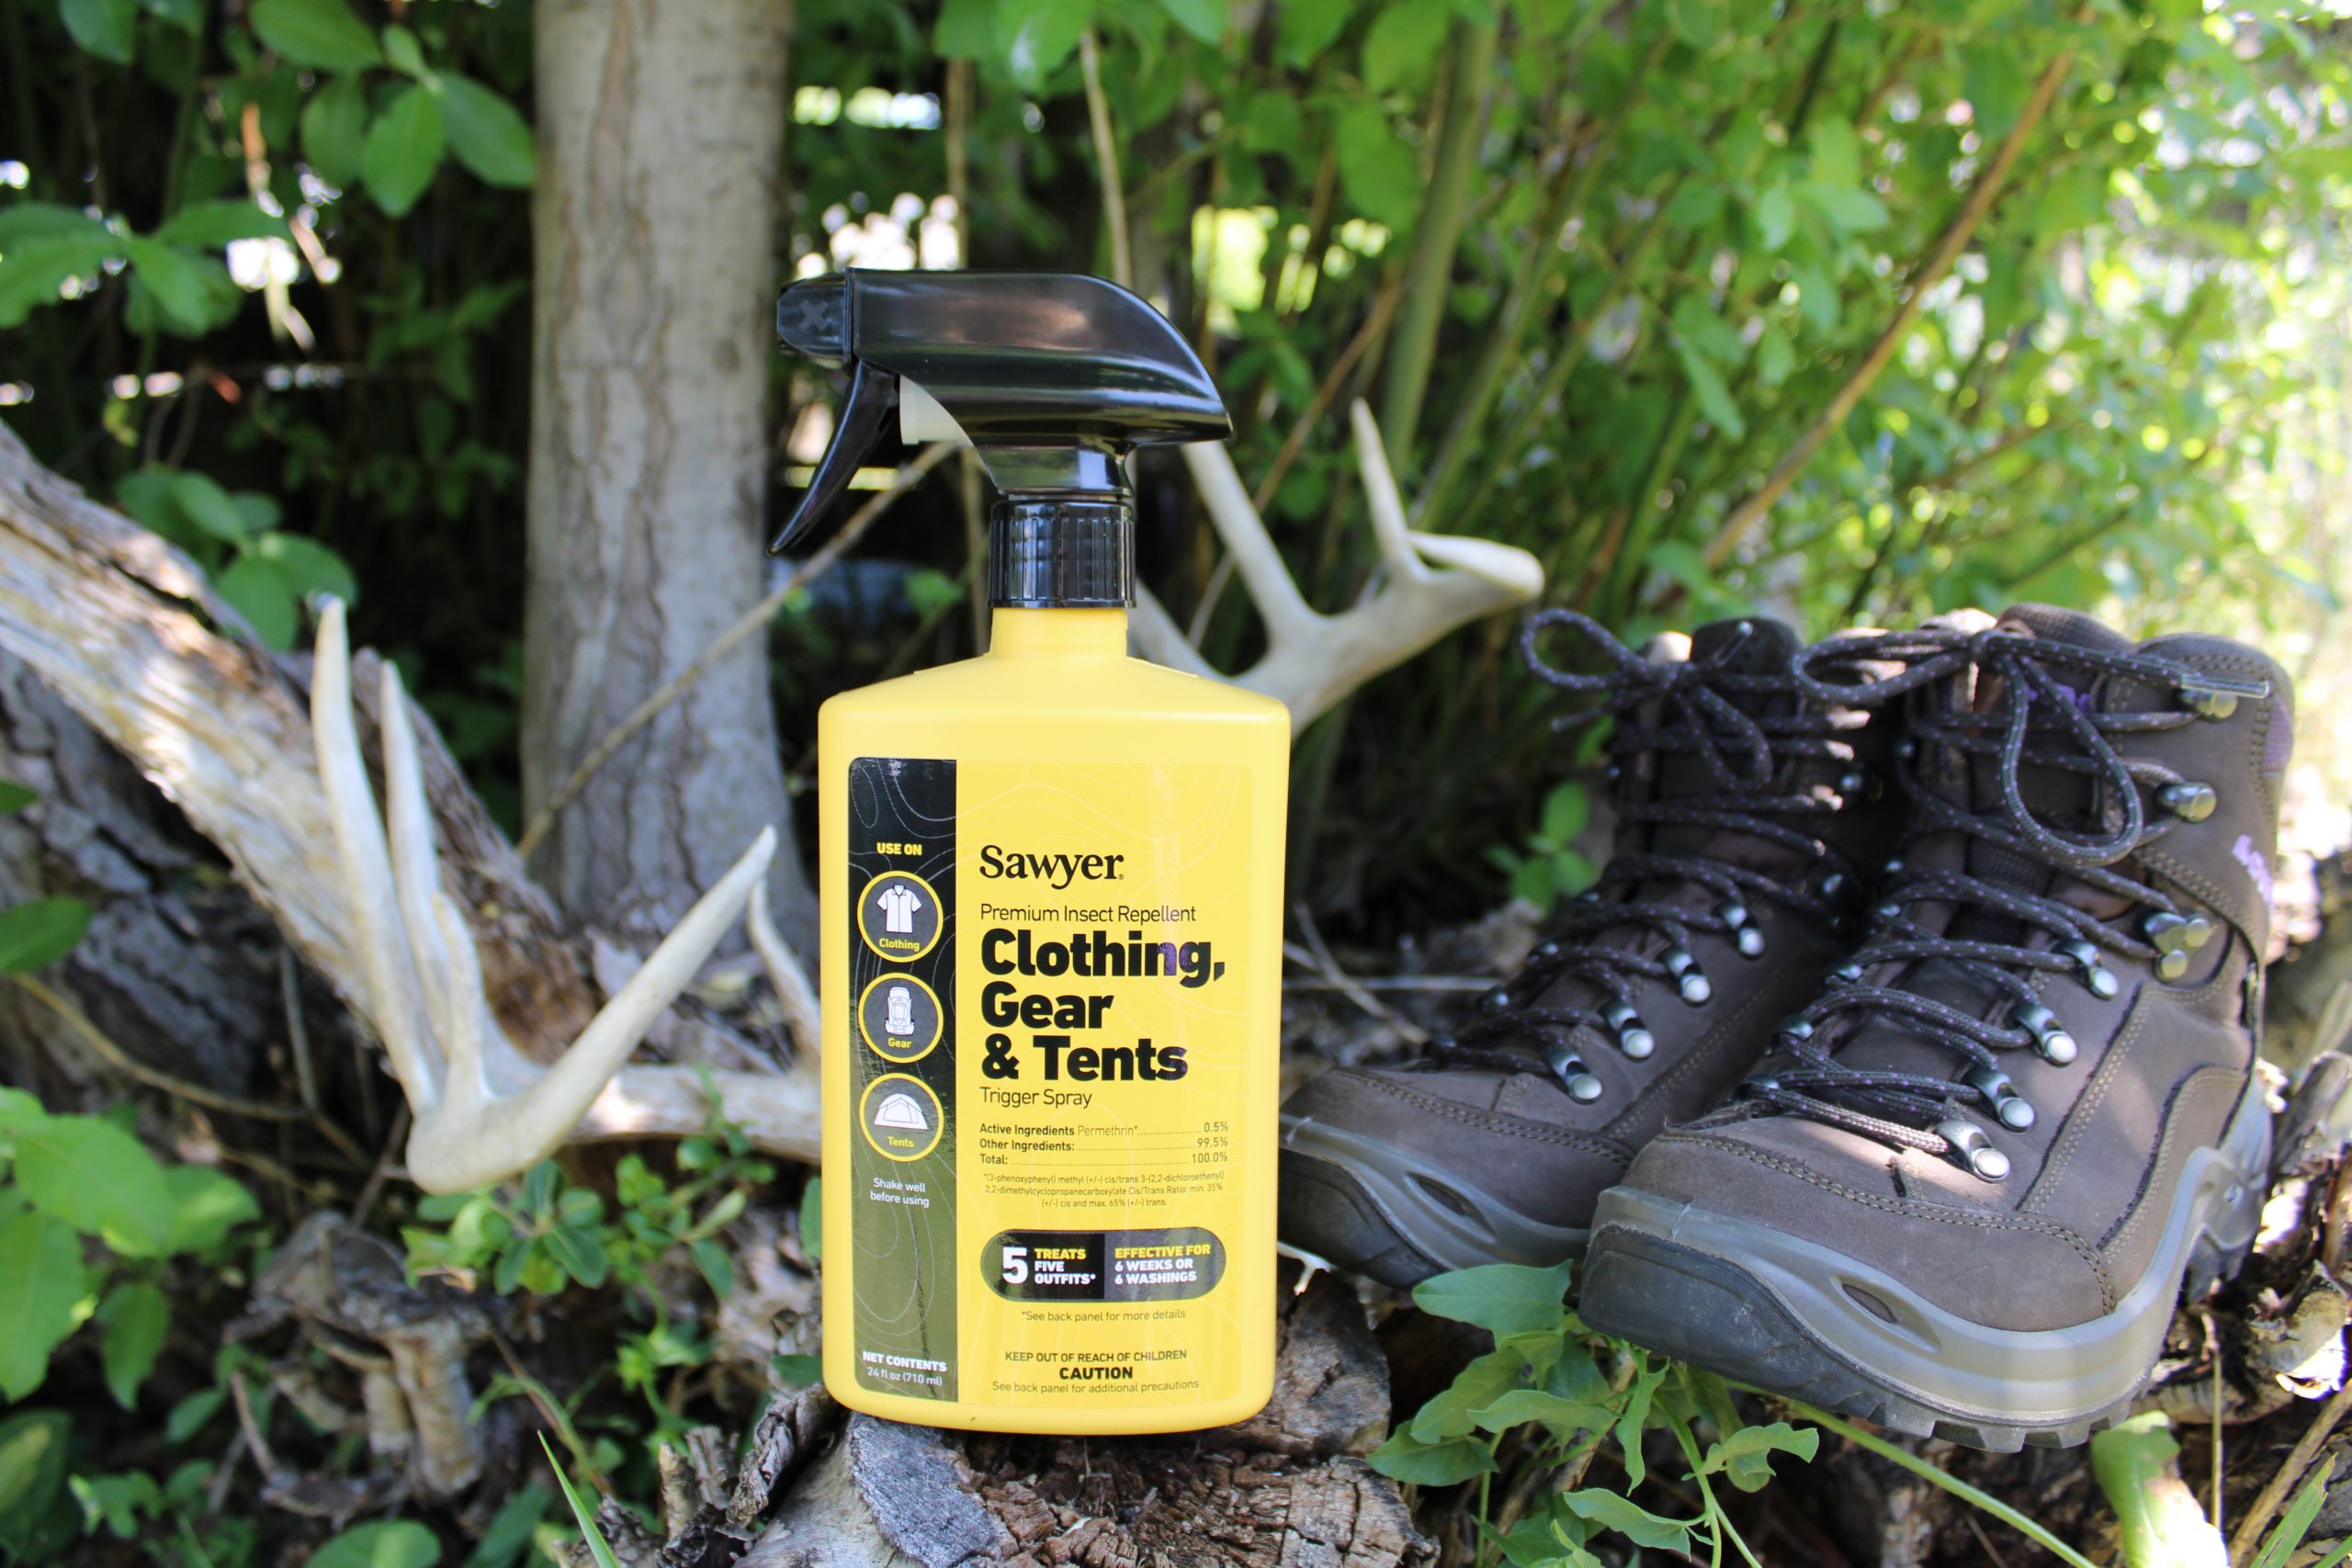 Sawyer permethrin spray bottle sits beside hiking boots treated with the spray